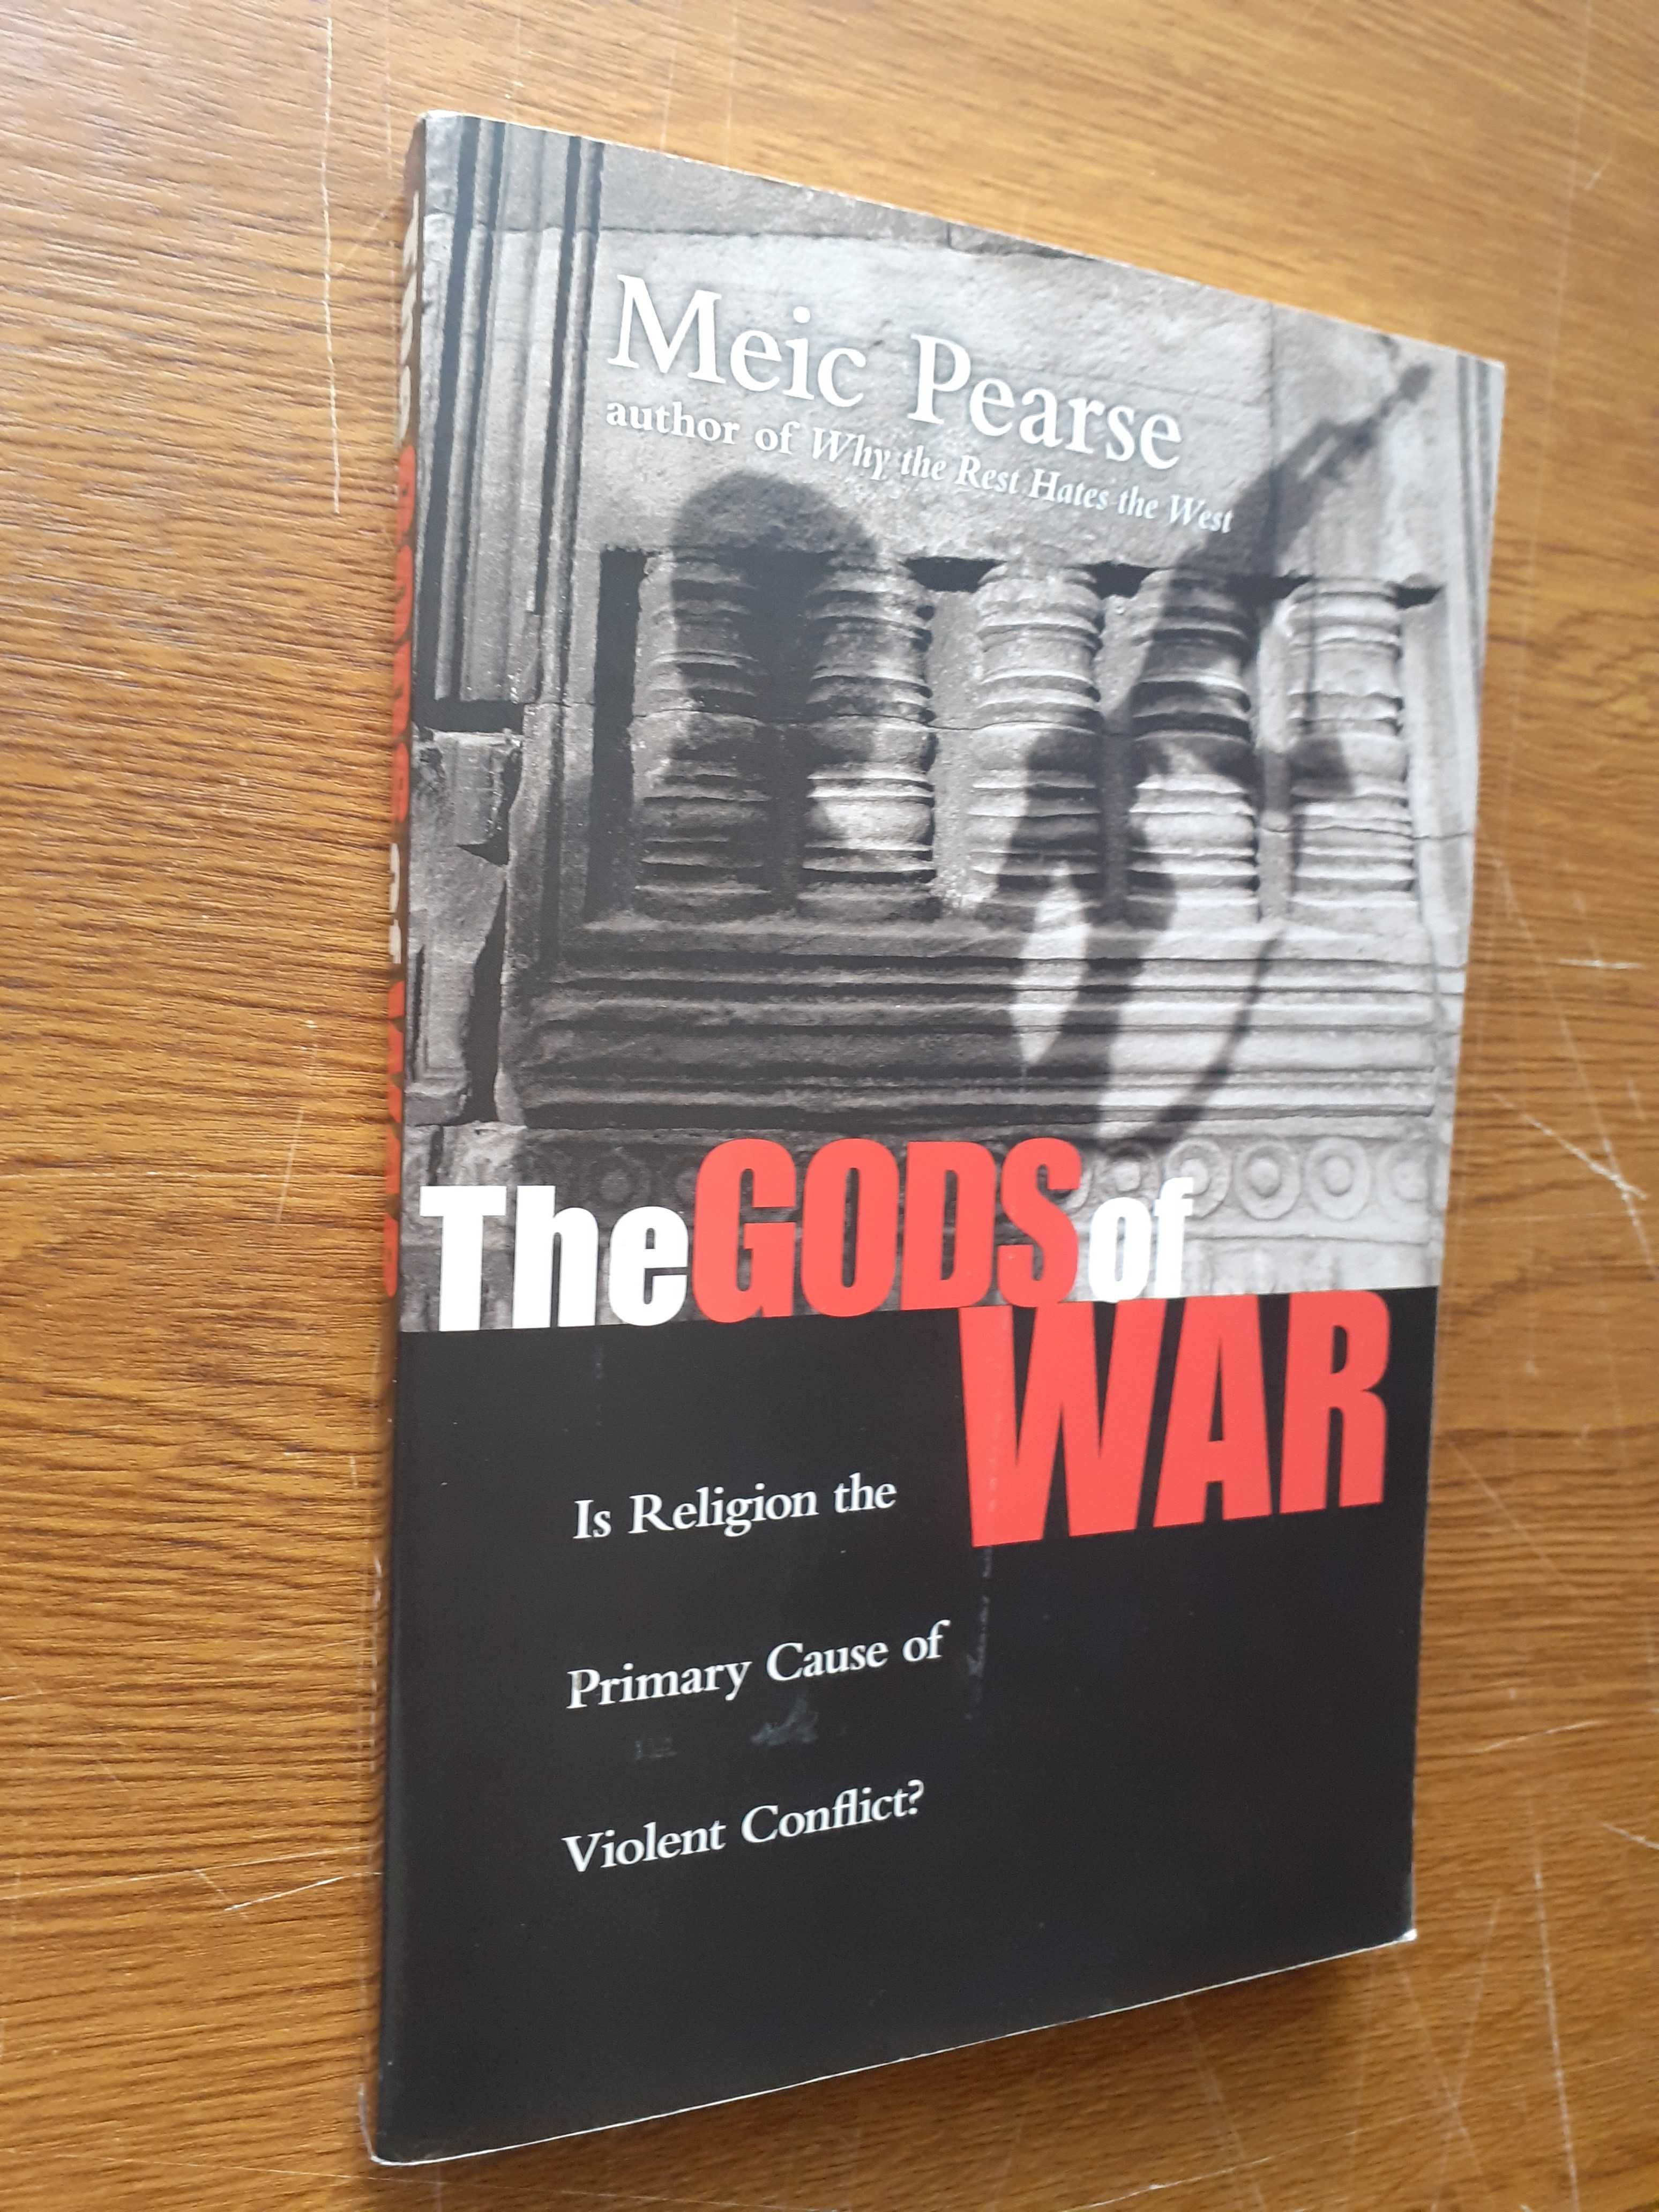 Gods of War - Meic Pearse